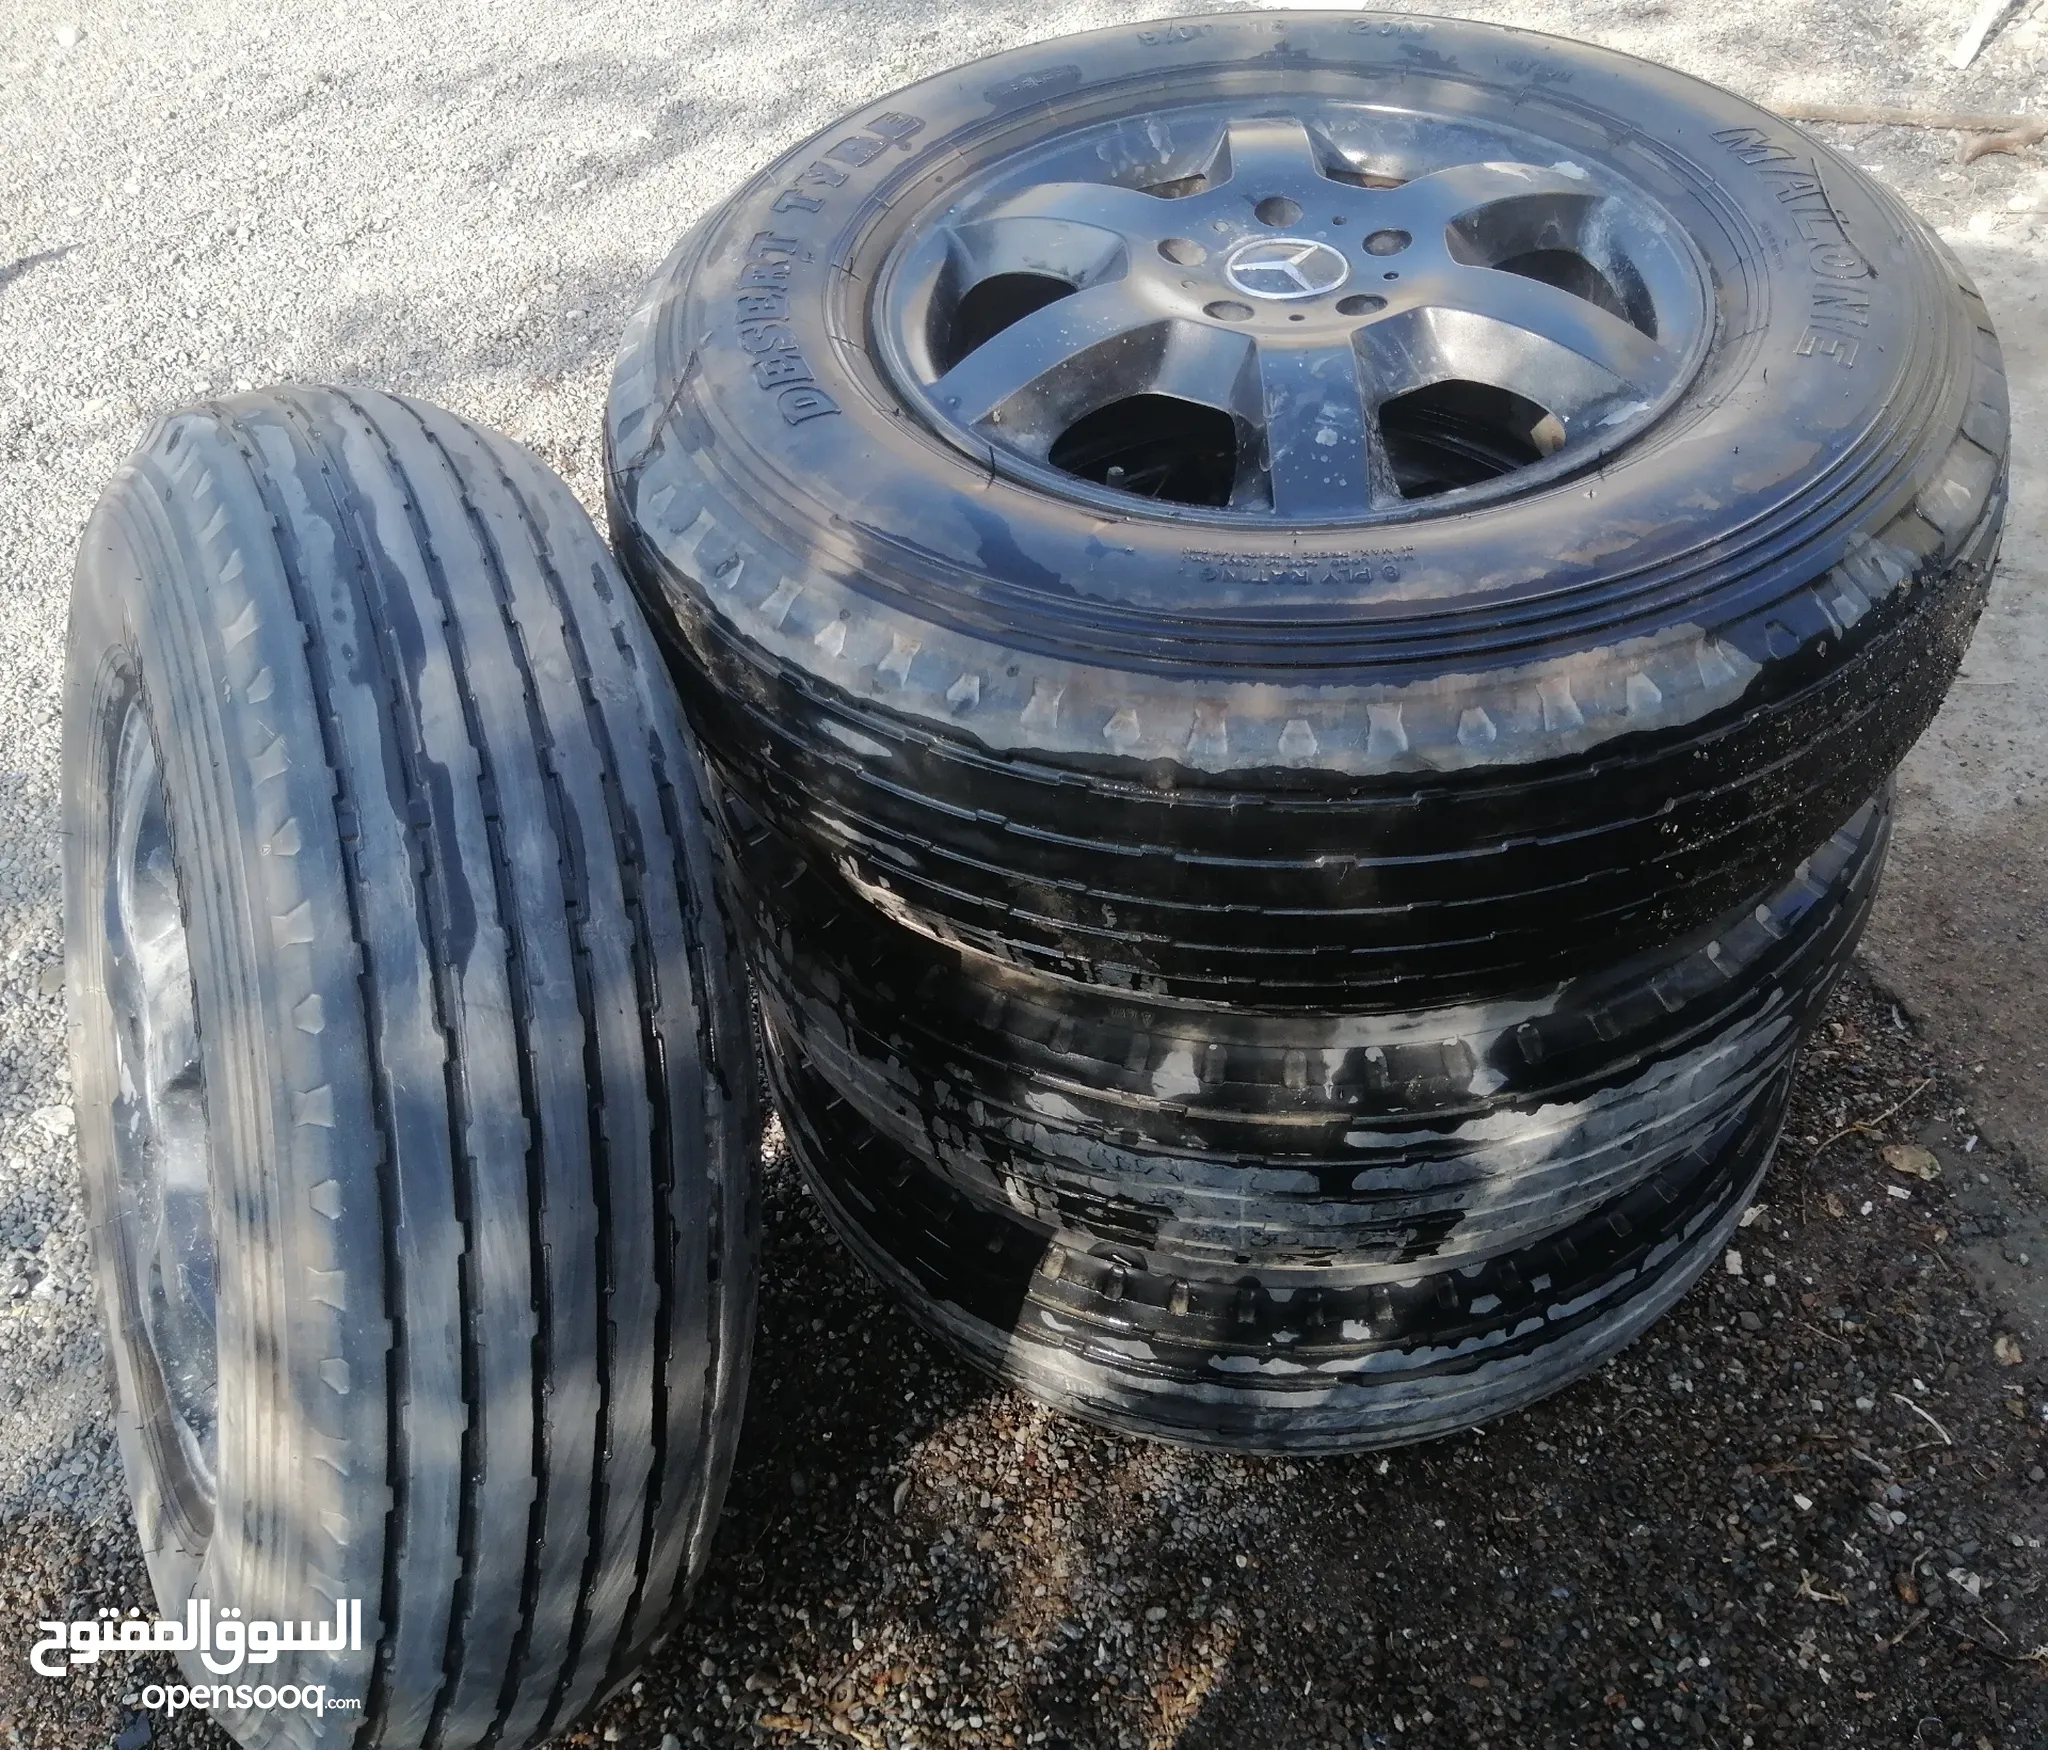 Cars Rims & Tyres for Sale in Fujairah: All Sizes: Best Prices | OpenSooq